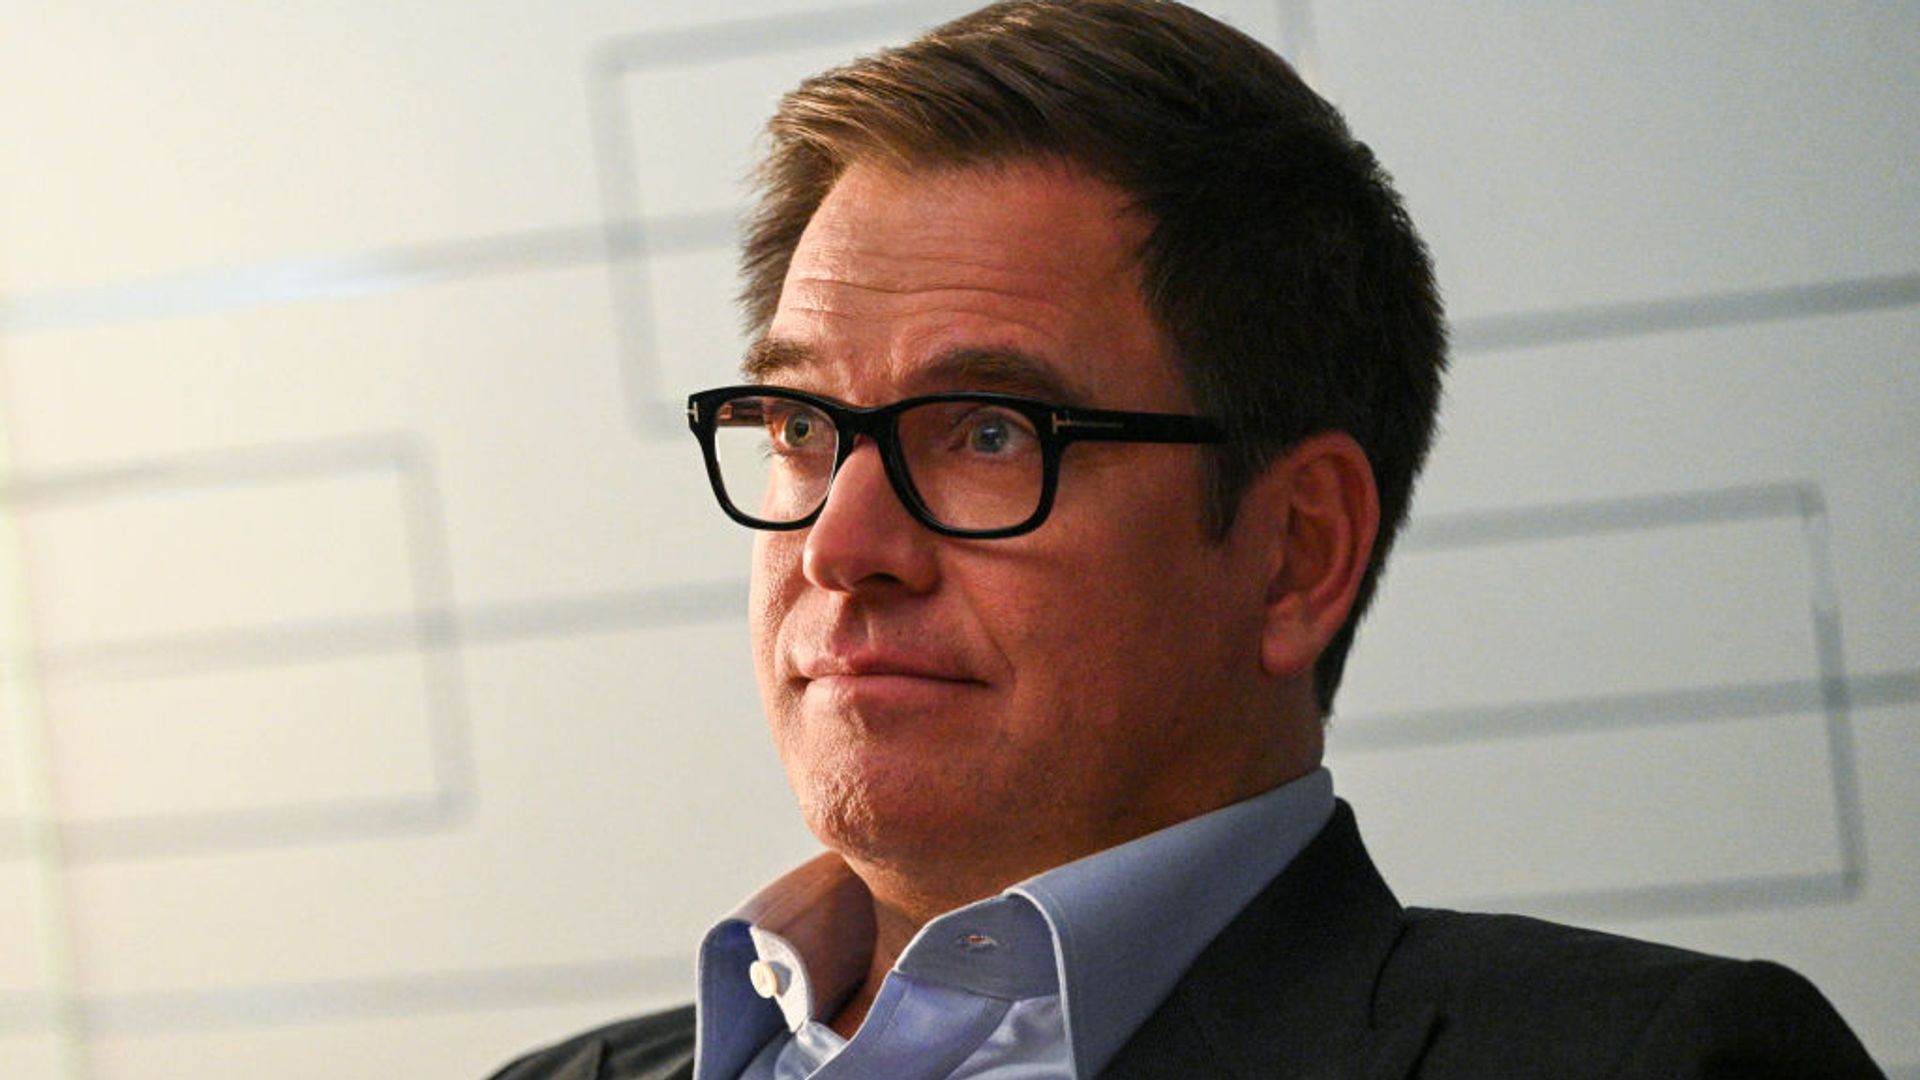 Michael Weatherly supports former co-star in heartwarming post